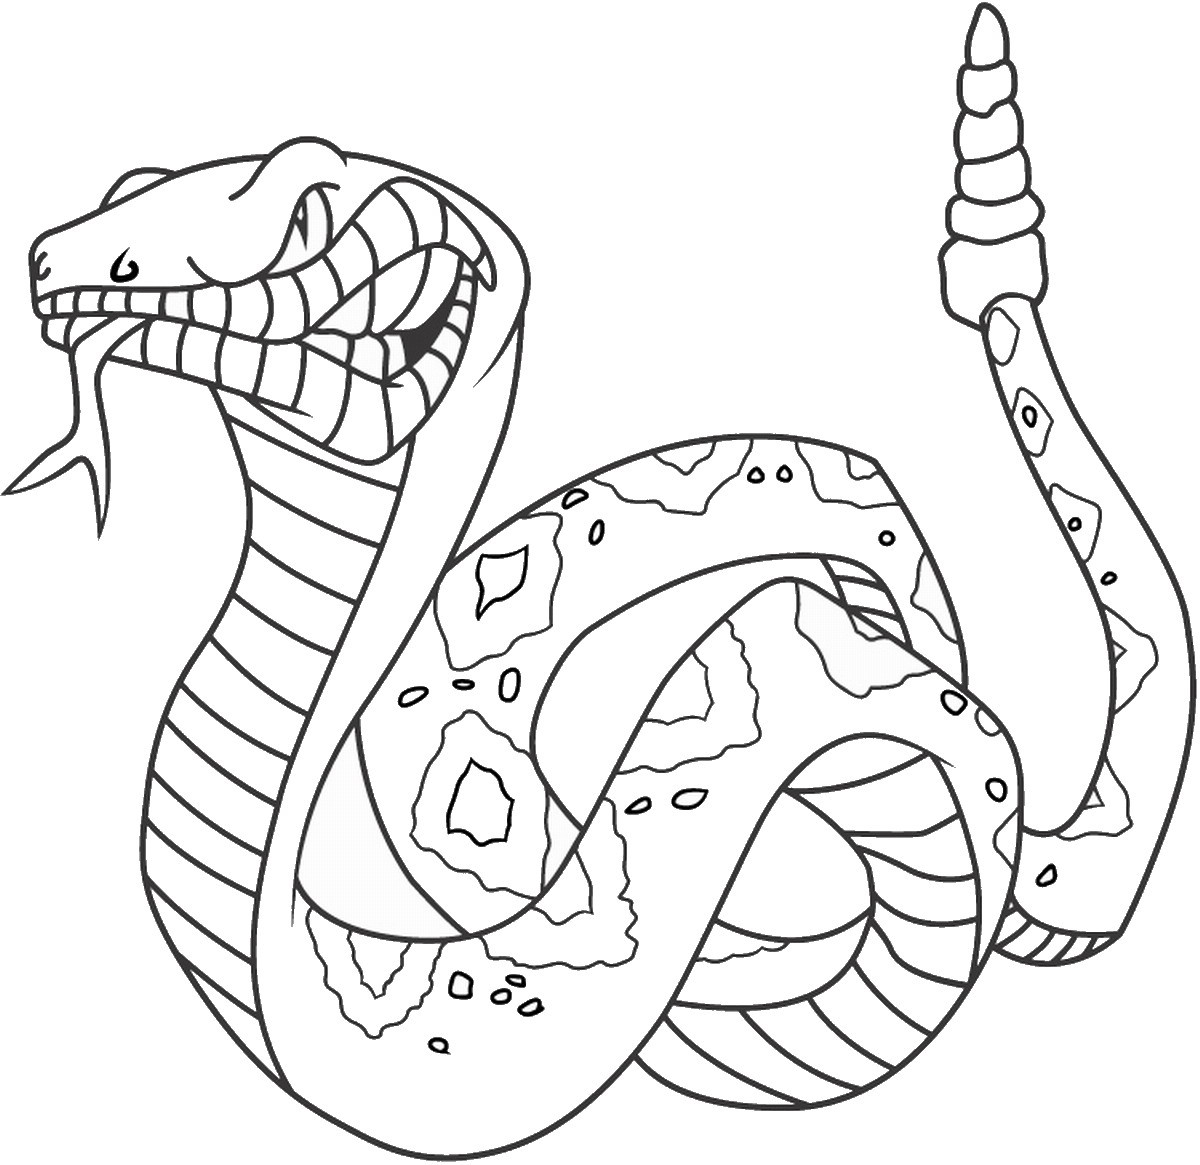 Snake Coloring Pages For Kids
 Snake Coloring Pages